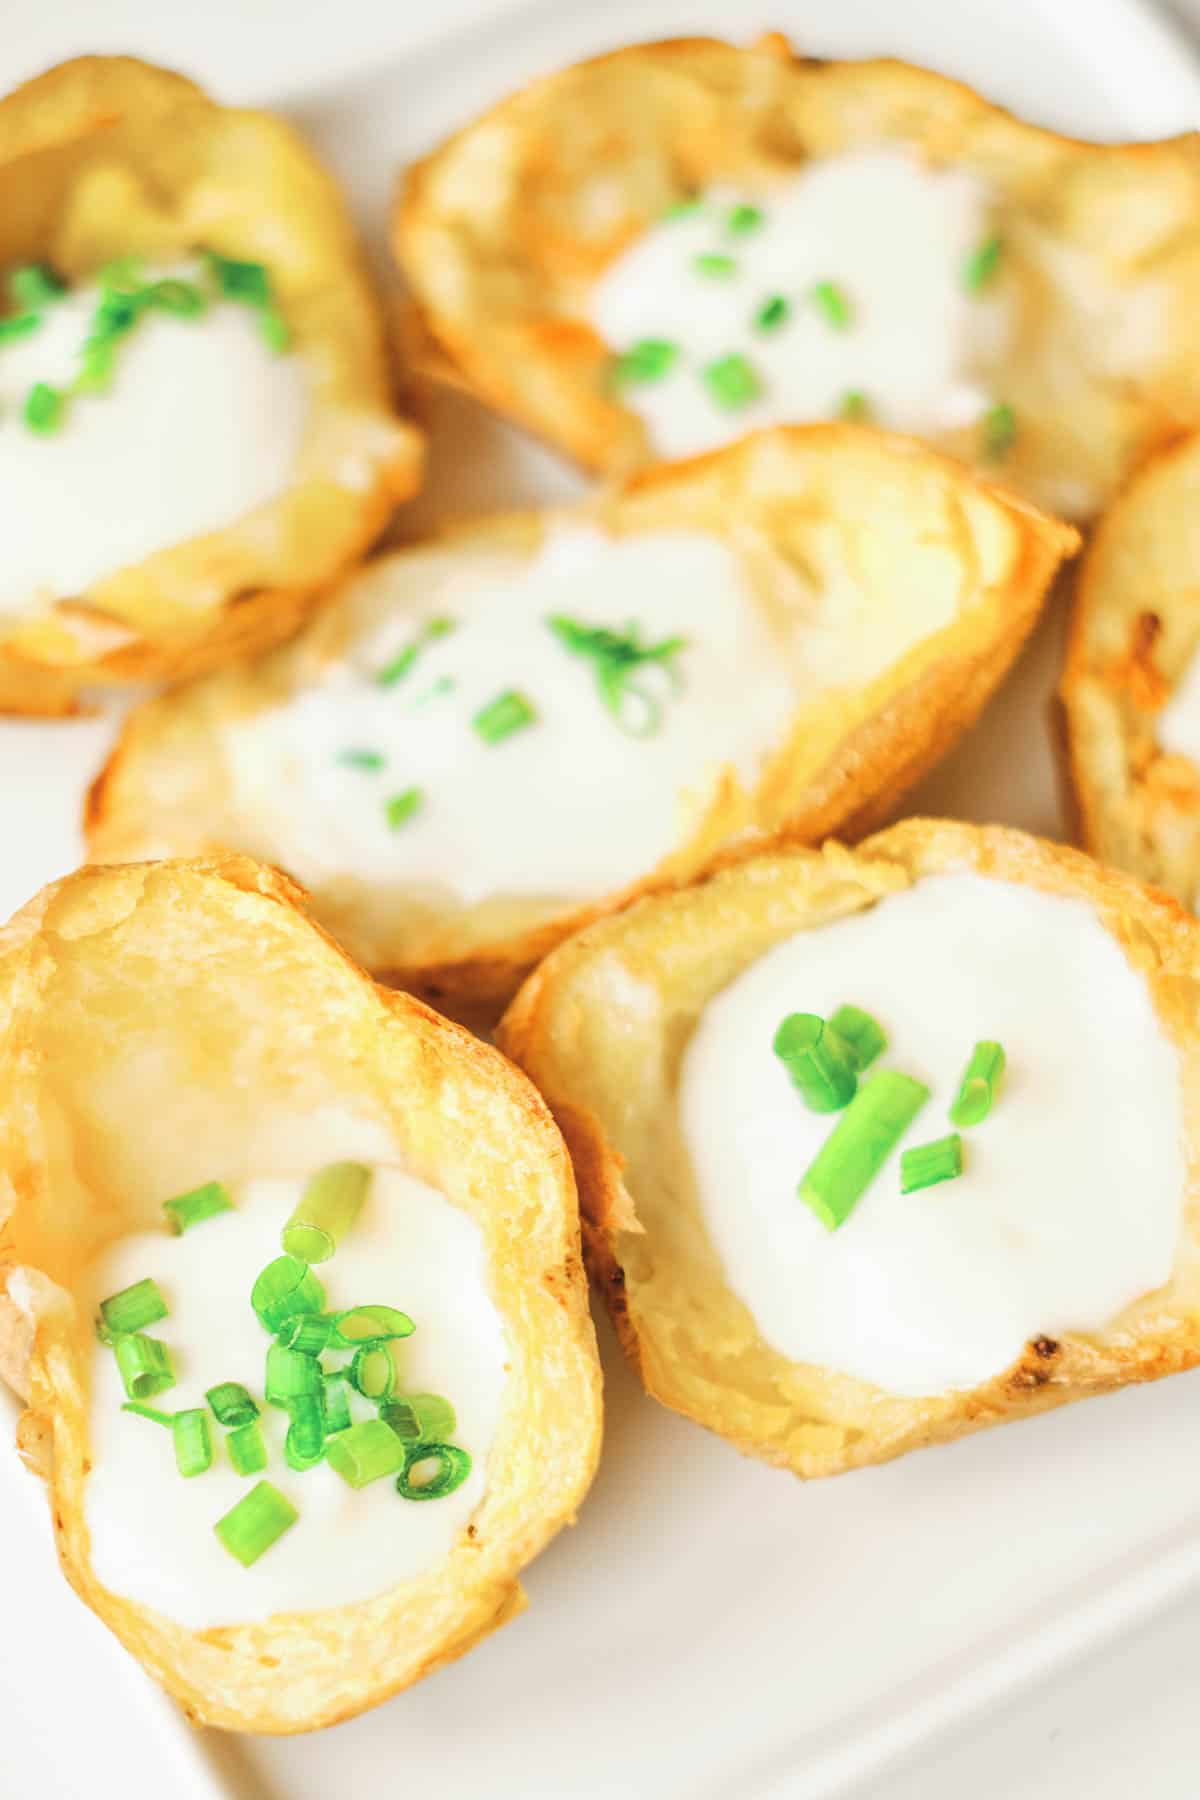 potato skins filled with cheese, sour cream, and topped with chives
